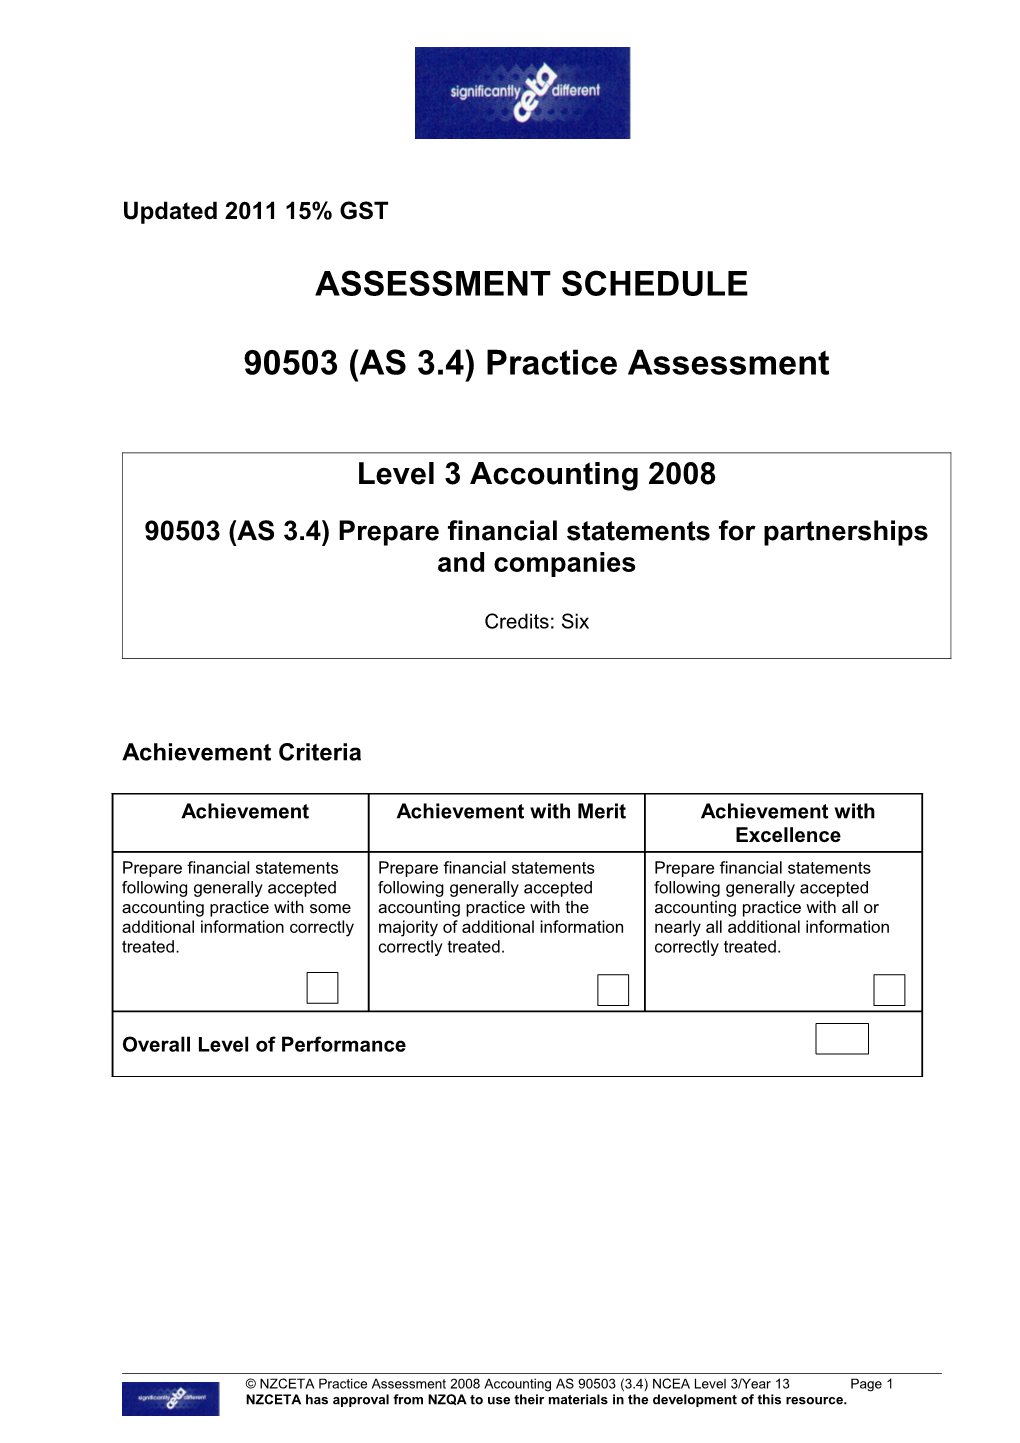 2008 Level 3 Accounting ASSESSMENT SCHEDULE